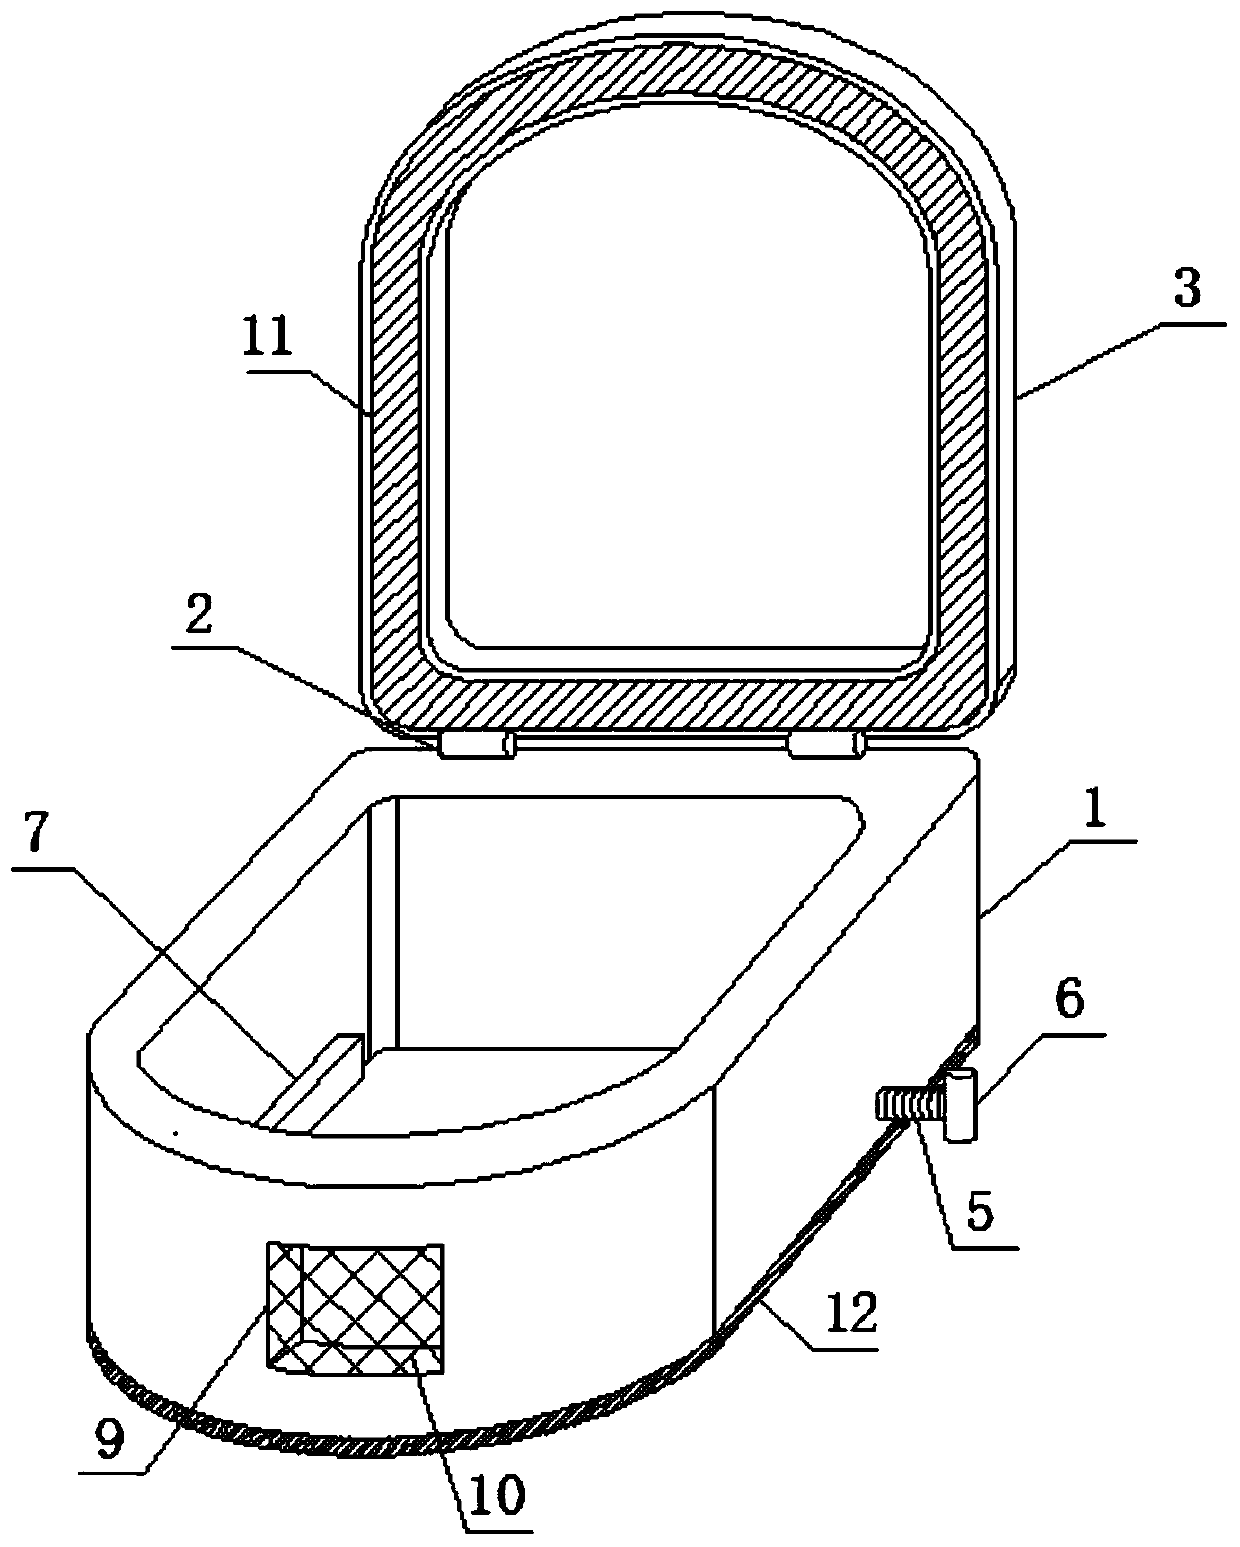 Portable toilet appliance for medical care